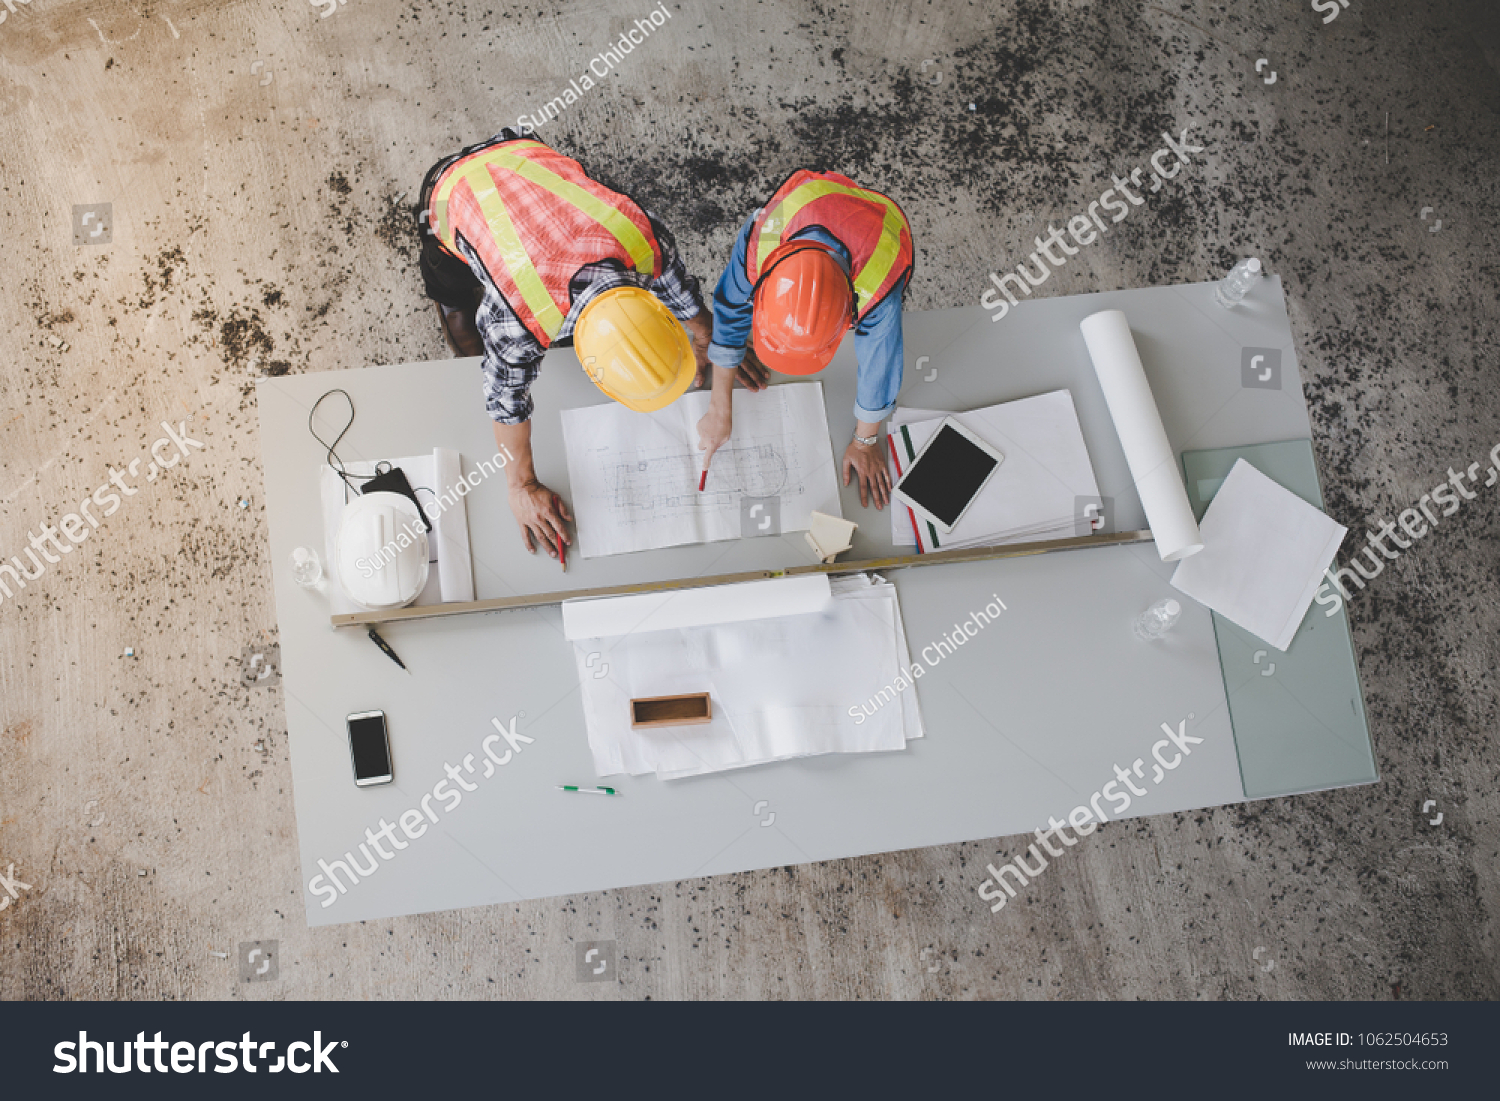 Top view of architects and engineers to help create a blueprint to build a modern building equipped with the skills to fix errors and make suggestions during construction. #1062504653